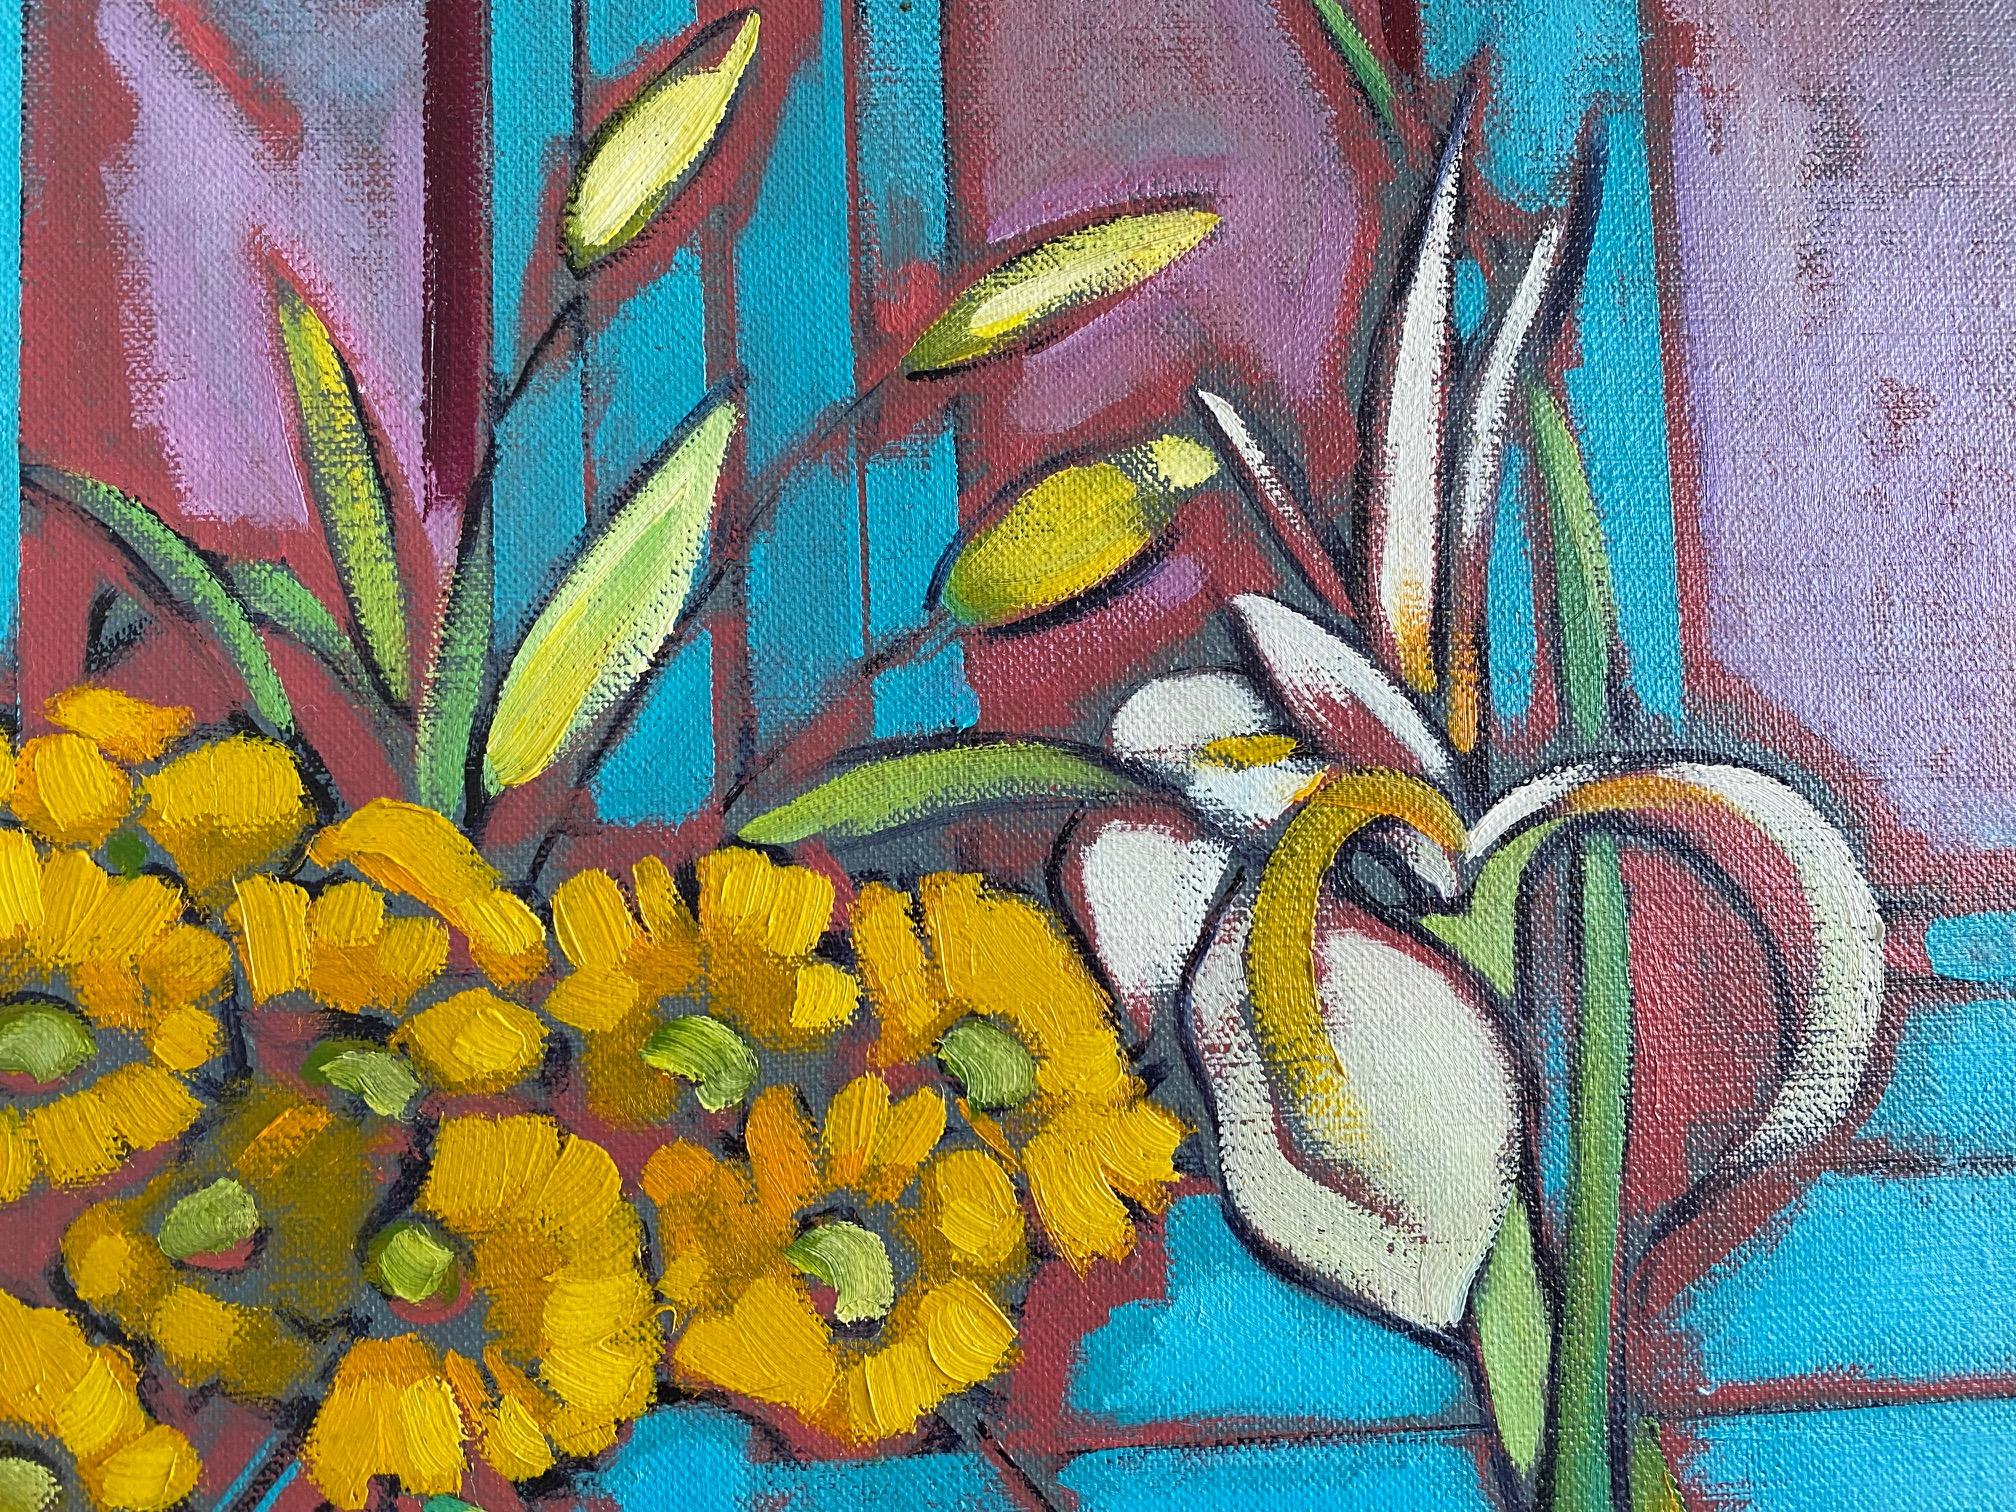 DO DAISIES FLICK? ( ¿Parpadean las margaritas? ), Oil on linen by Chico Montilla.
Measurements in centimeters (H) 100 x (W) 81 x (D) 2 cm. /  In inches 39.37 x 31.89 x 0.79 